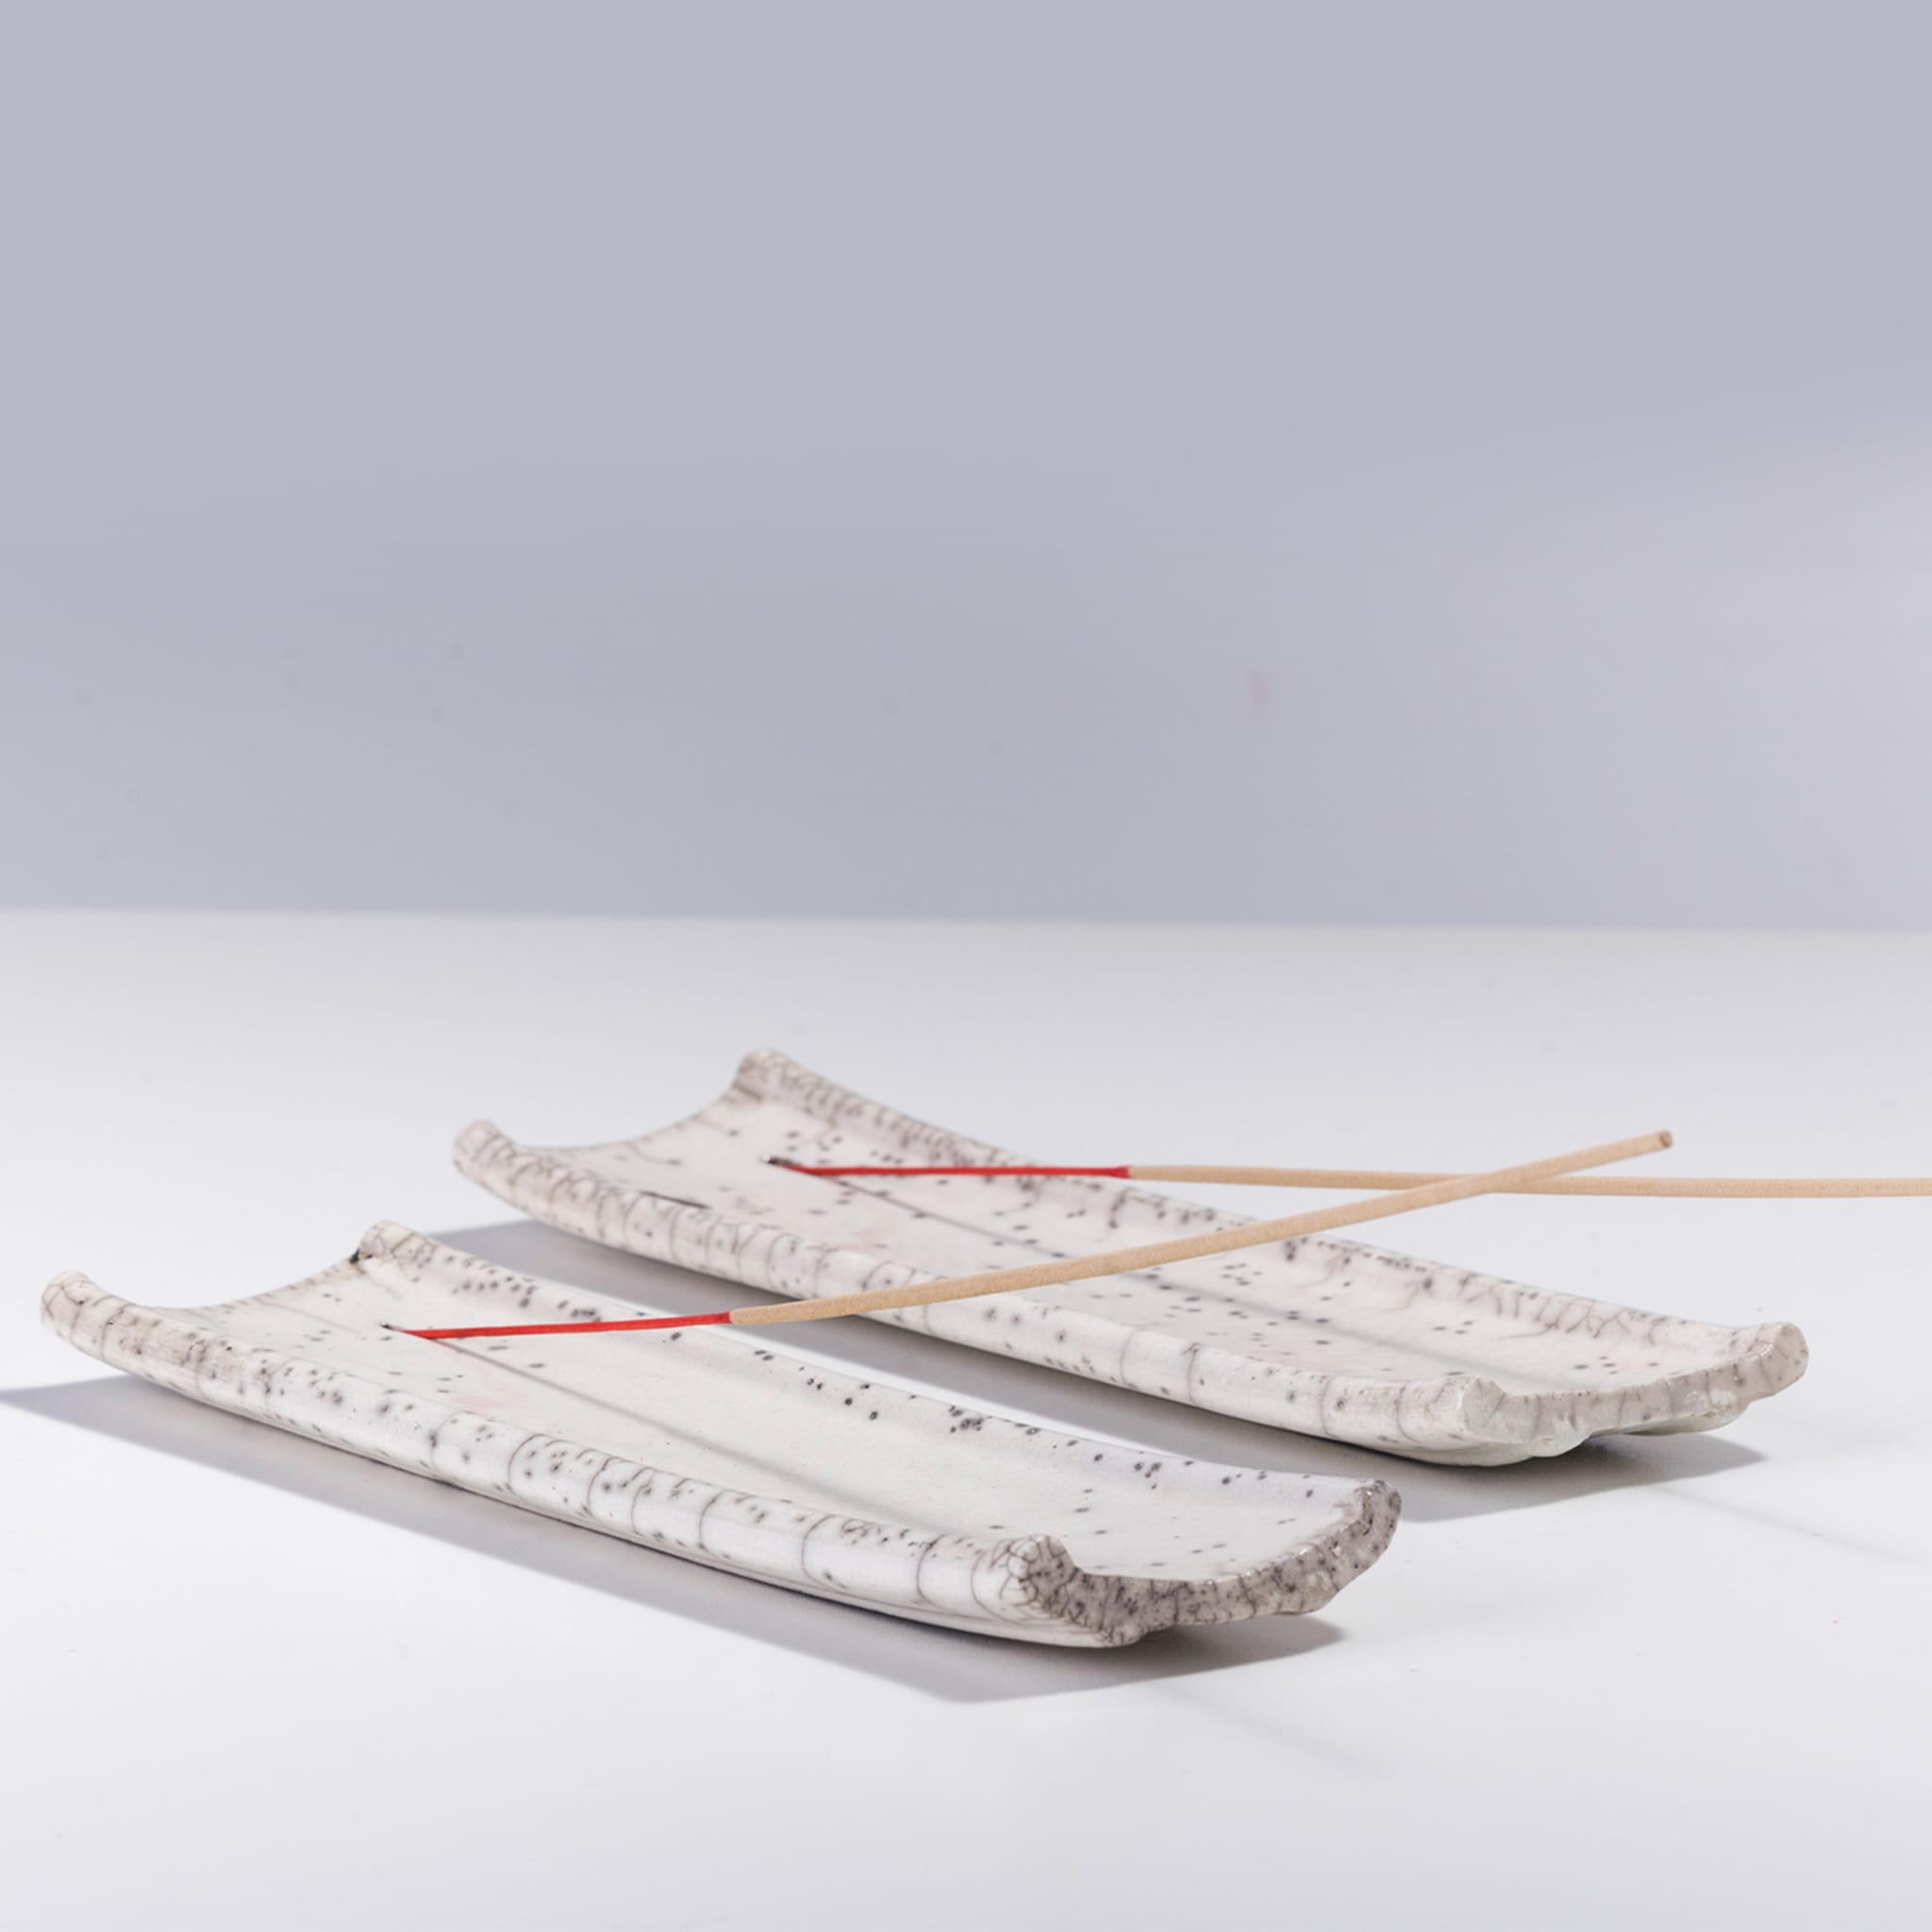 Incenso Set of 2 Incense Holders - Alternative view 4